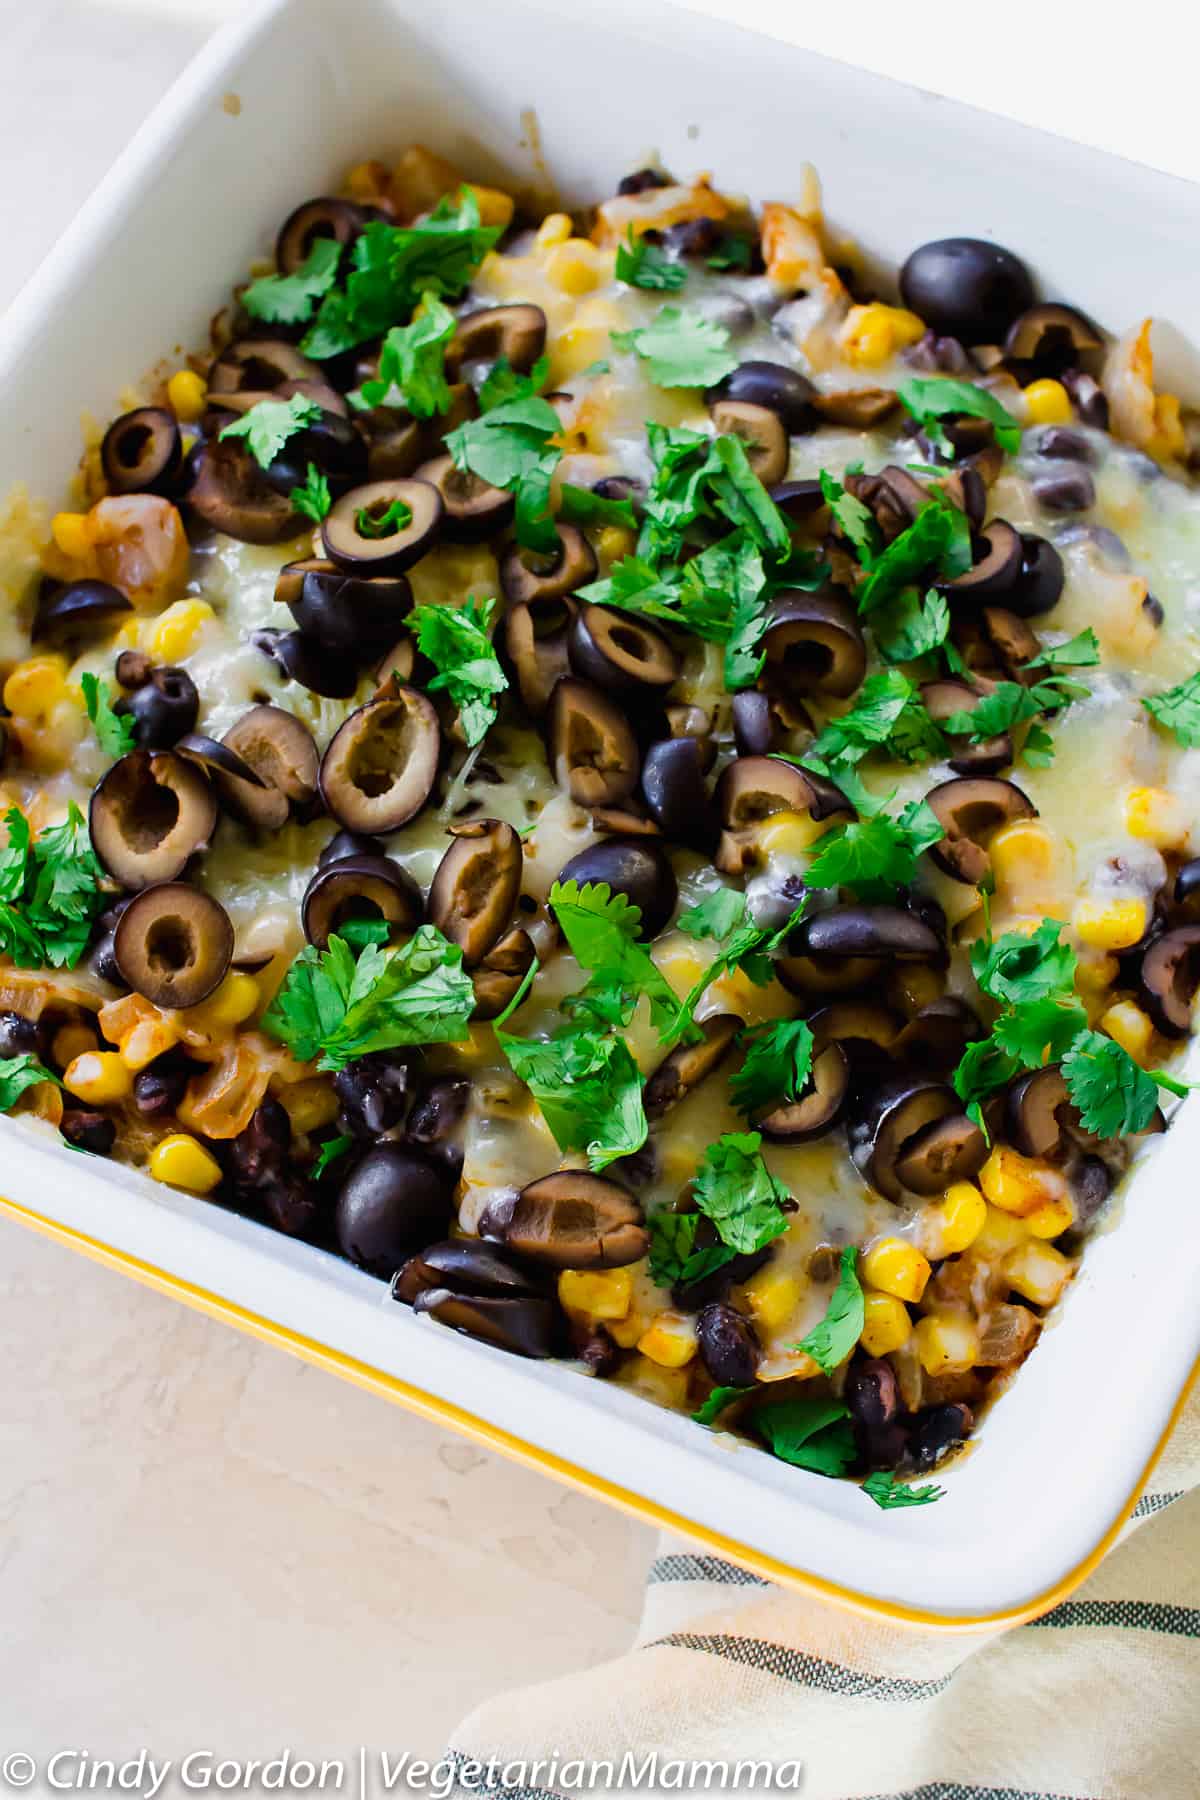 Bowl of Mexican Tater Tot Casserole